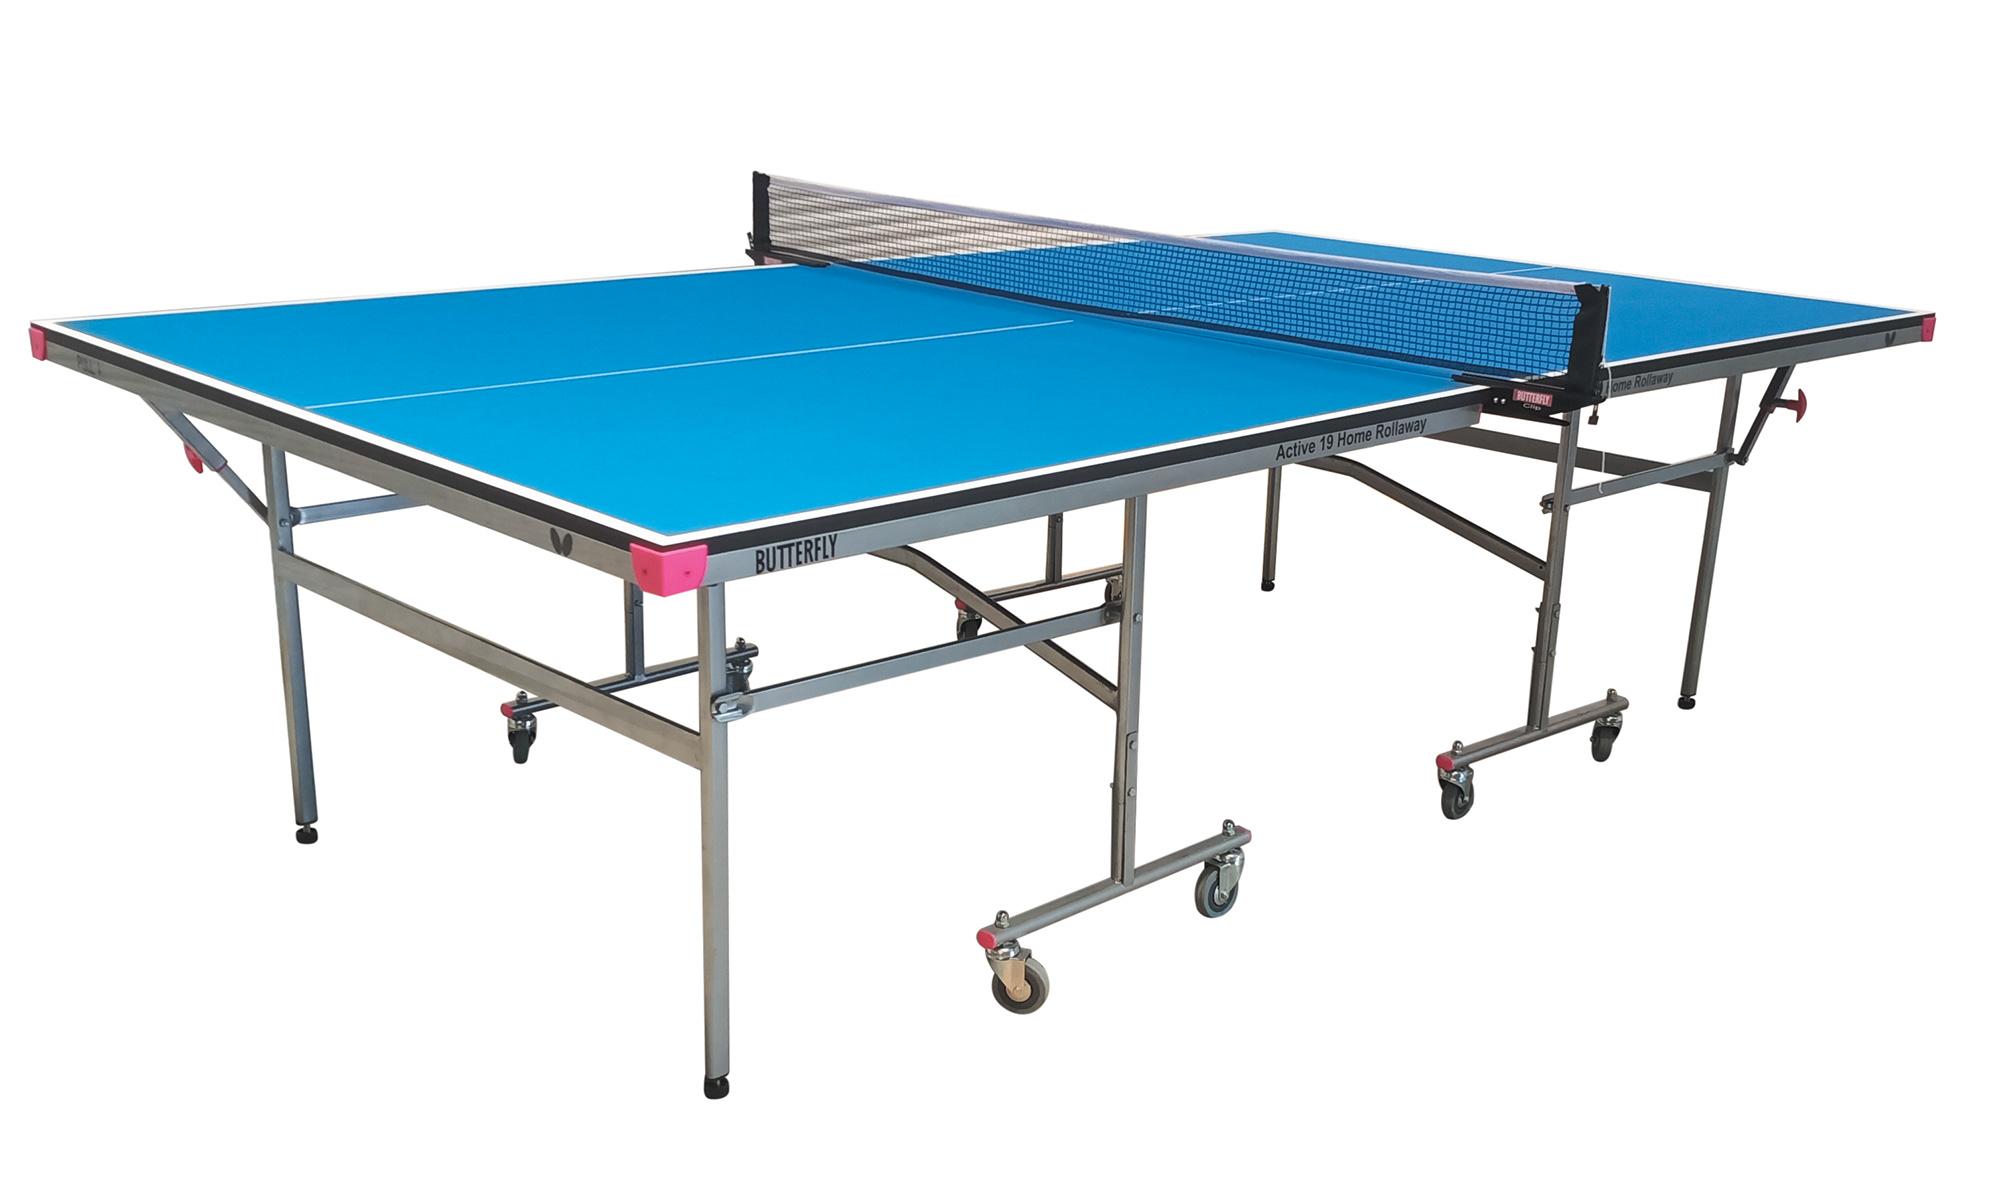 Butterfly Active 19 Indoor Rollaway Table Tennis Table